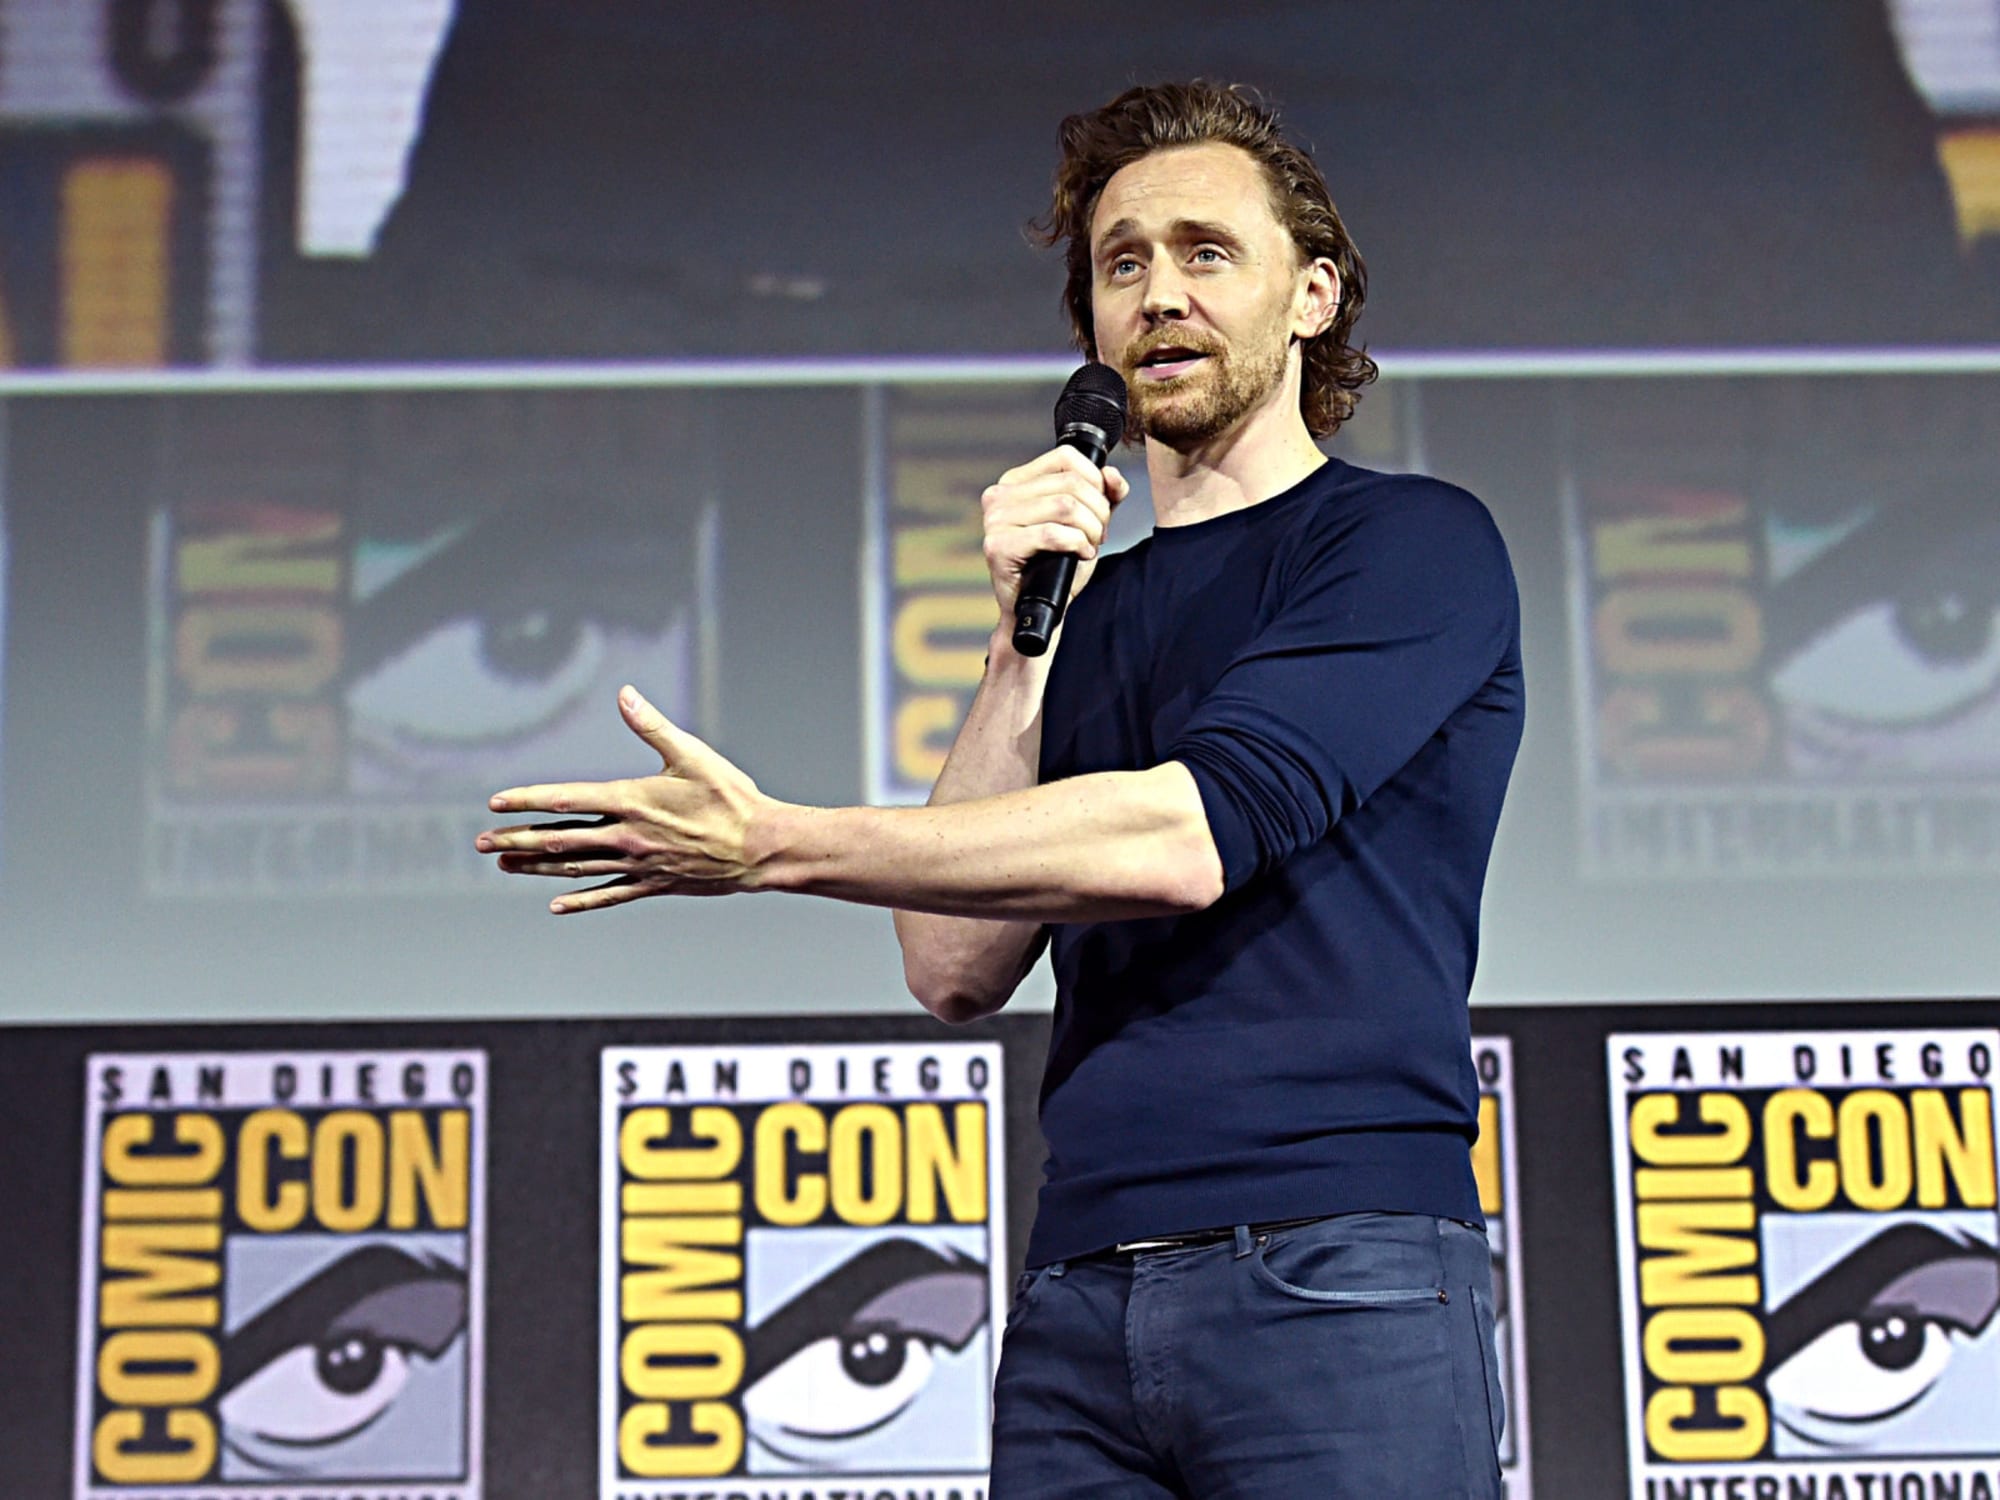 Marvel ComicCon 2022 schedule How long is Marvel's Hall H panel?